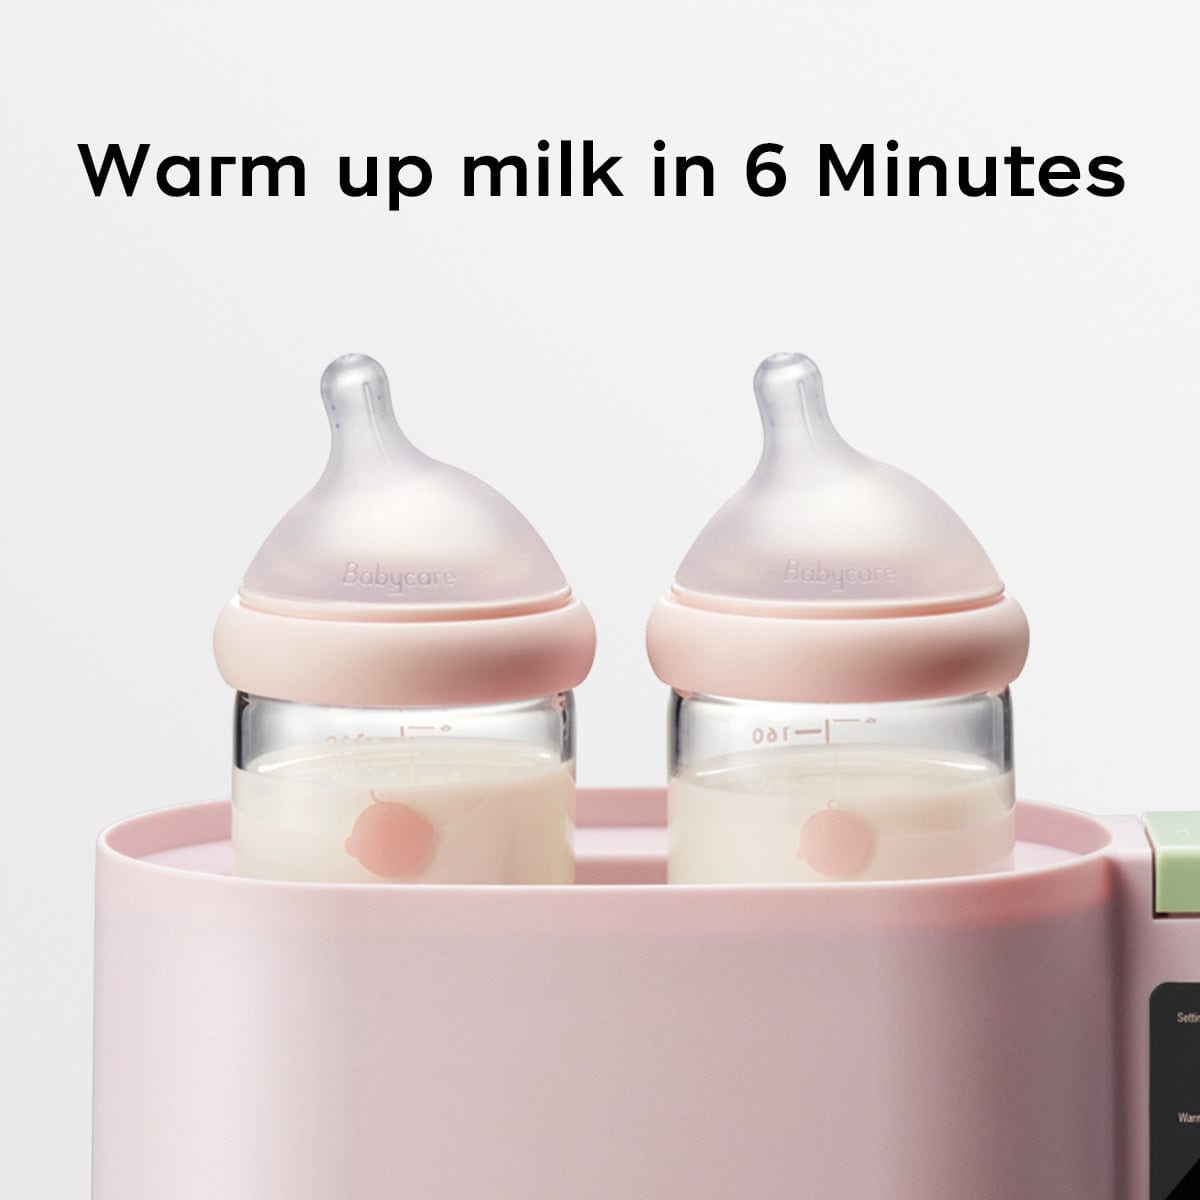 Warm up in 6 minutes with Bc babycare's baby bottle sterilizer warmer for breastmilk - Bc Babycare